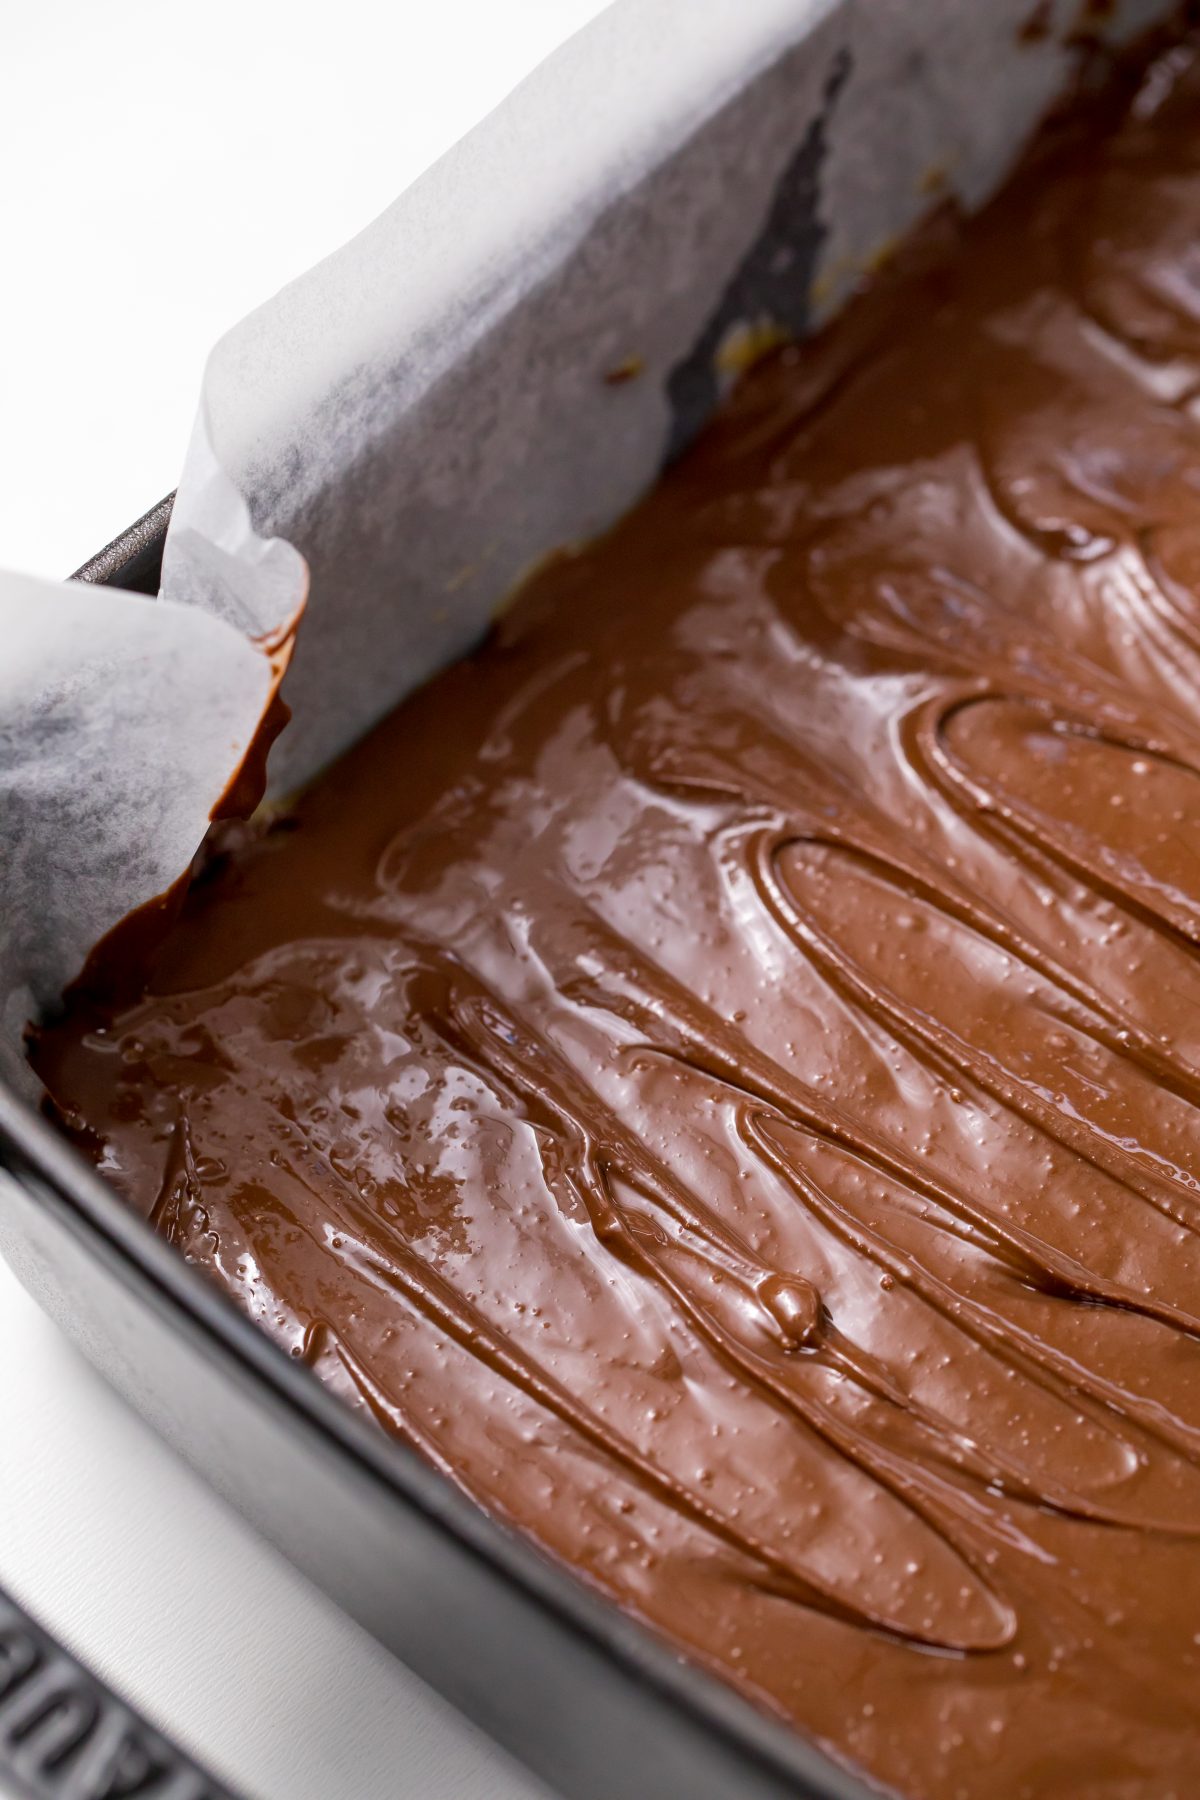 Spread chocolate mixture evenly in pan